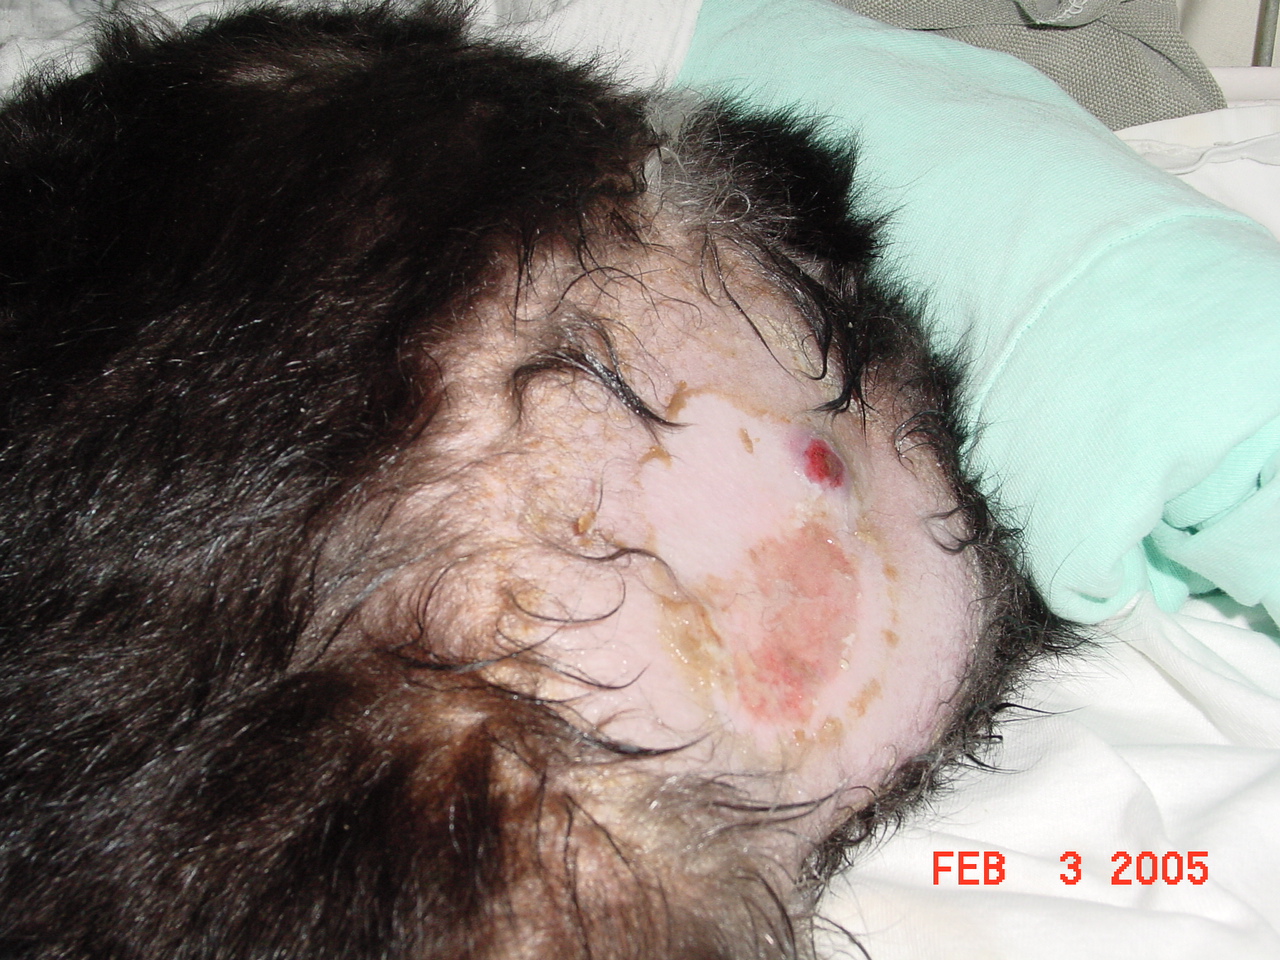 Staph infection on a skunk